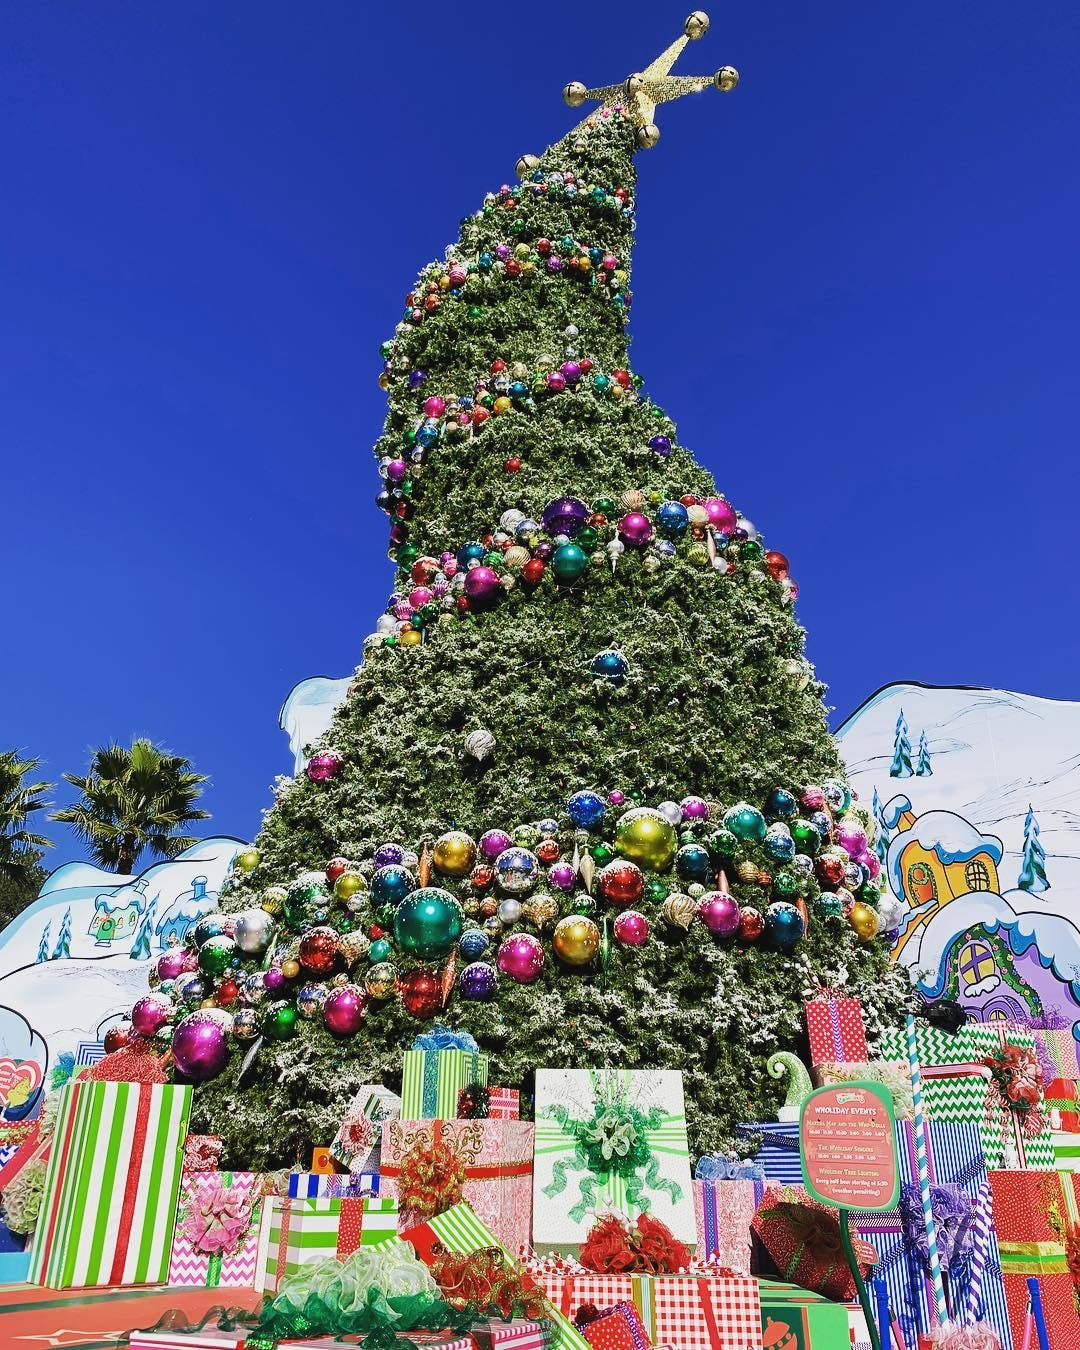 Grinchmas with The Grinch, his faithful dog Max and the Who-ville Whos return to Universal Studios Hollywood